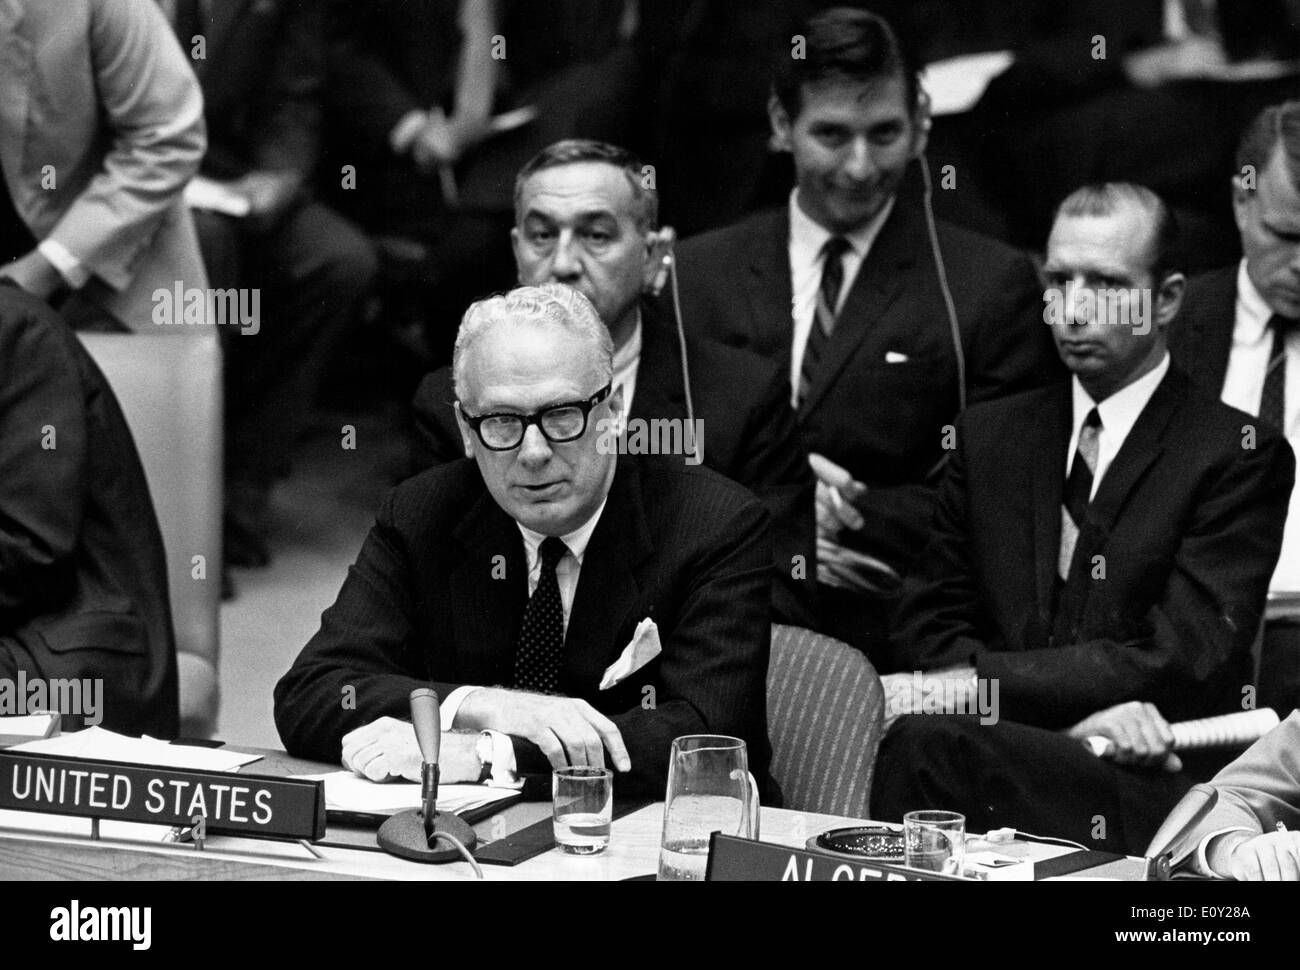 Aug 21, 1968; New York, NY, USA; The Security Council tonight began debate, at the request of six Council members, concerning 'the present erious situation in the Czechoslovakia Socalist Republic'. The decision to take up this item was taken by a vote of 13 in favour to 2 against. In the debate statements were made by the representatives of Czechoslovakia, U.S., Canada, France, Denmark, Hungary, Brazil, Soviet Union and the United Kingdom. The picture shows Mr. GEORGE BALL from the United States addressing the Council. Stock Photo